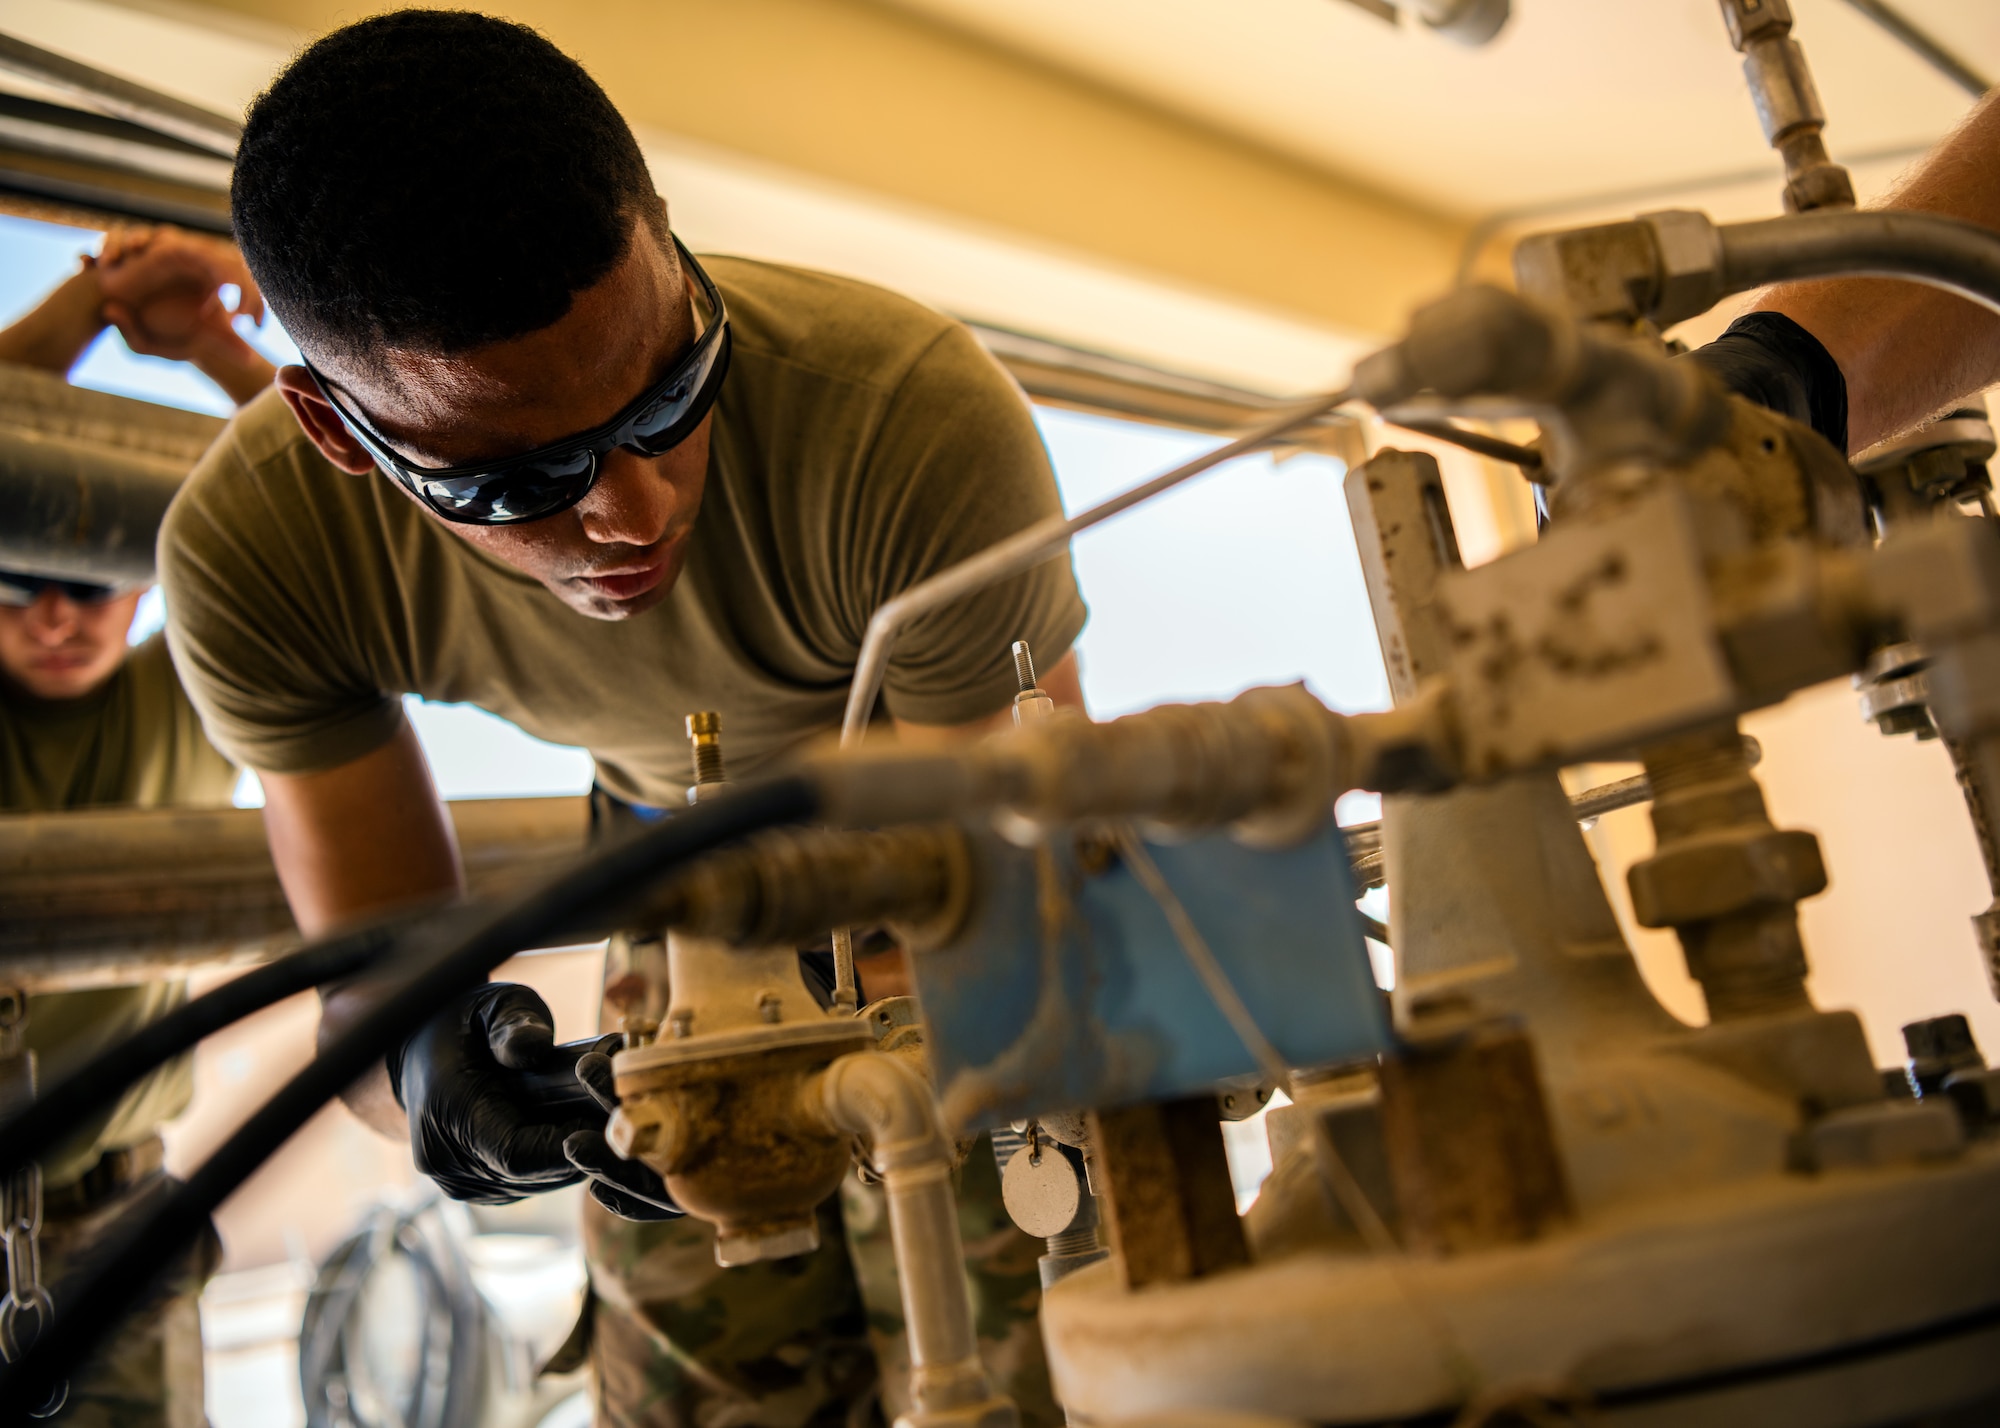 U.S. Air Force Airmen from the 380th Expeditionary Civil Engineer Squadron water & fuel systems maintenance and the 380th Expeditionary Logistic Readiness Squadron fuels flight perform maintenance on a fuels system at Al Dhafra Air Base, United Arab Emirates, June 14, 2021.